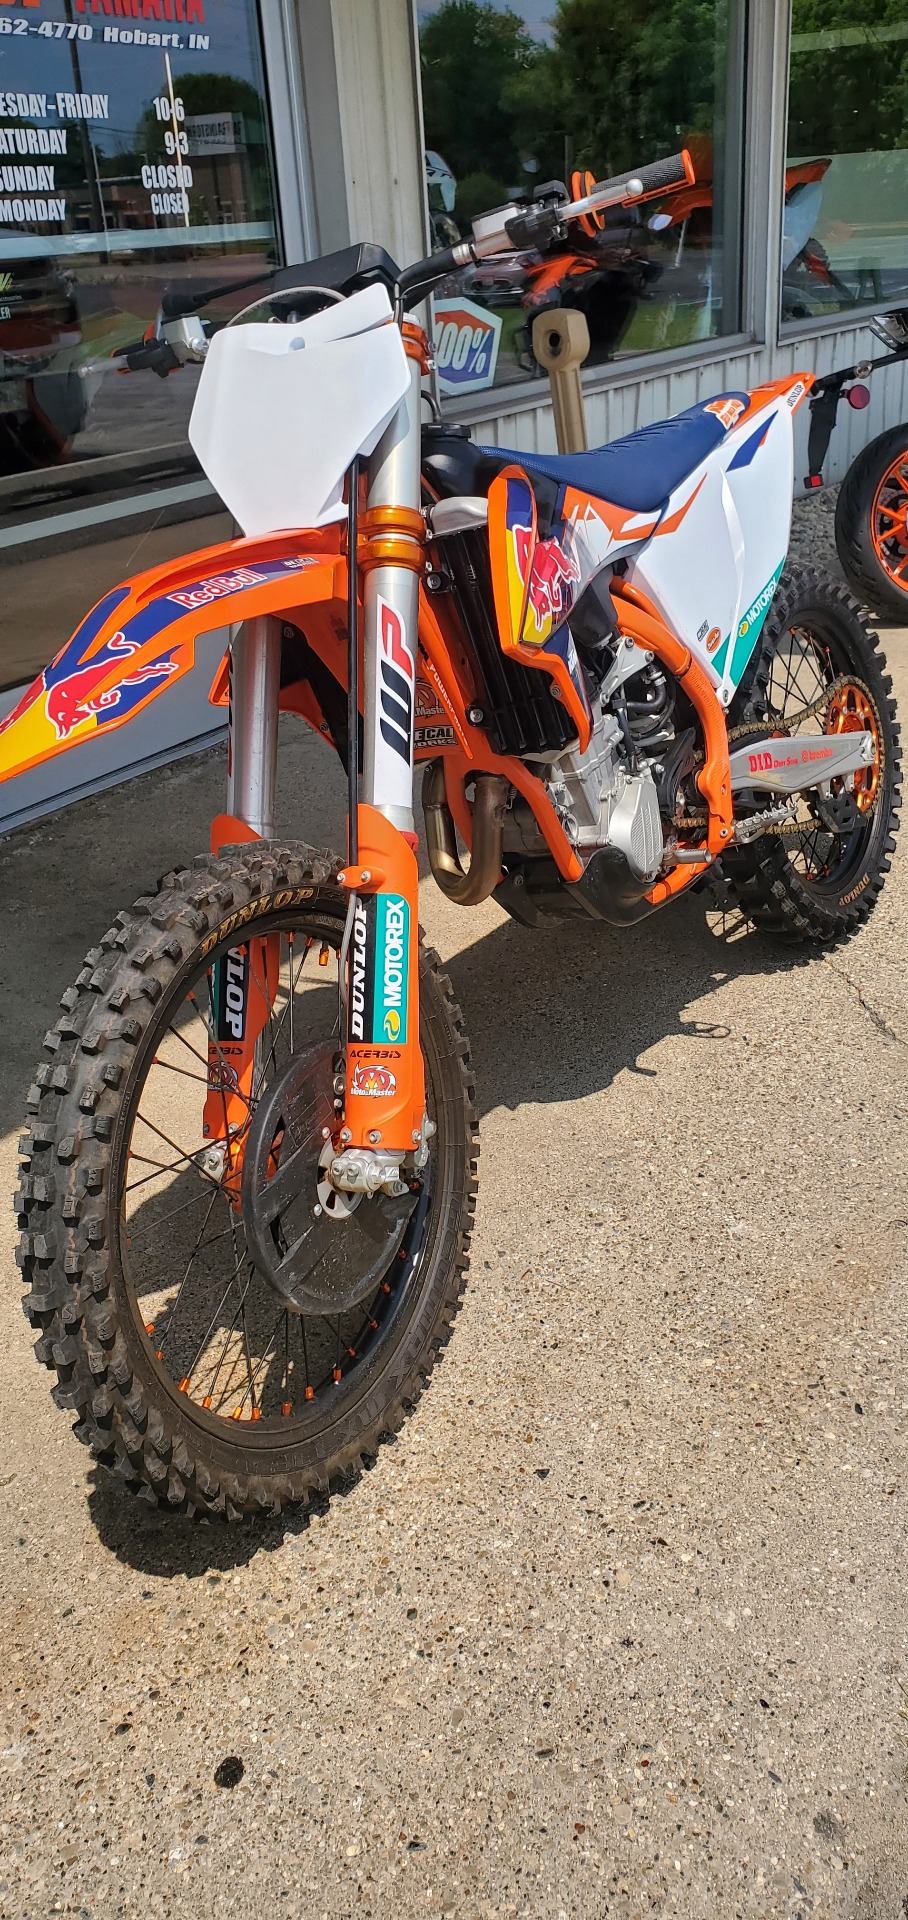 2021 KTM 450 SX-F Factory Edition in Hobart, Indiana - Photo 8